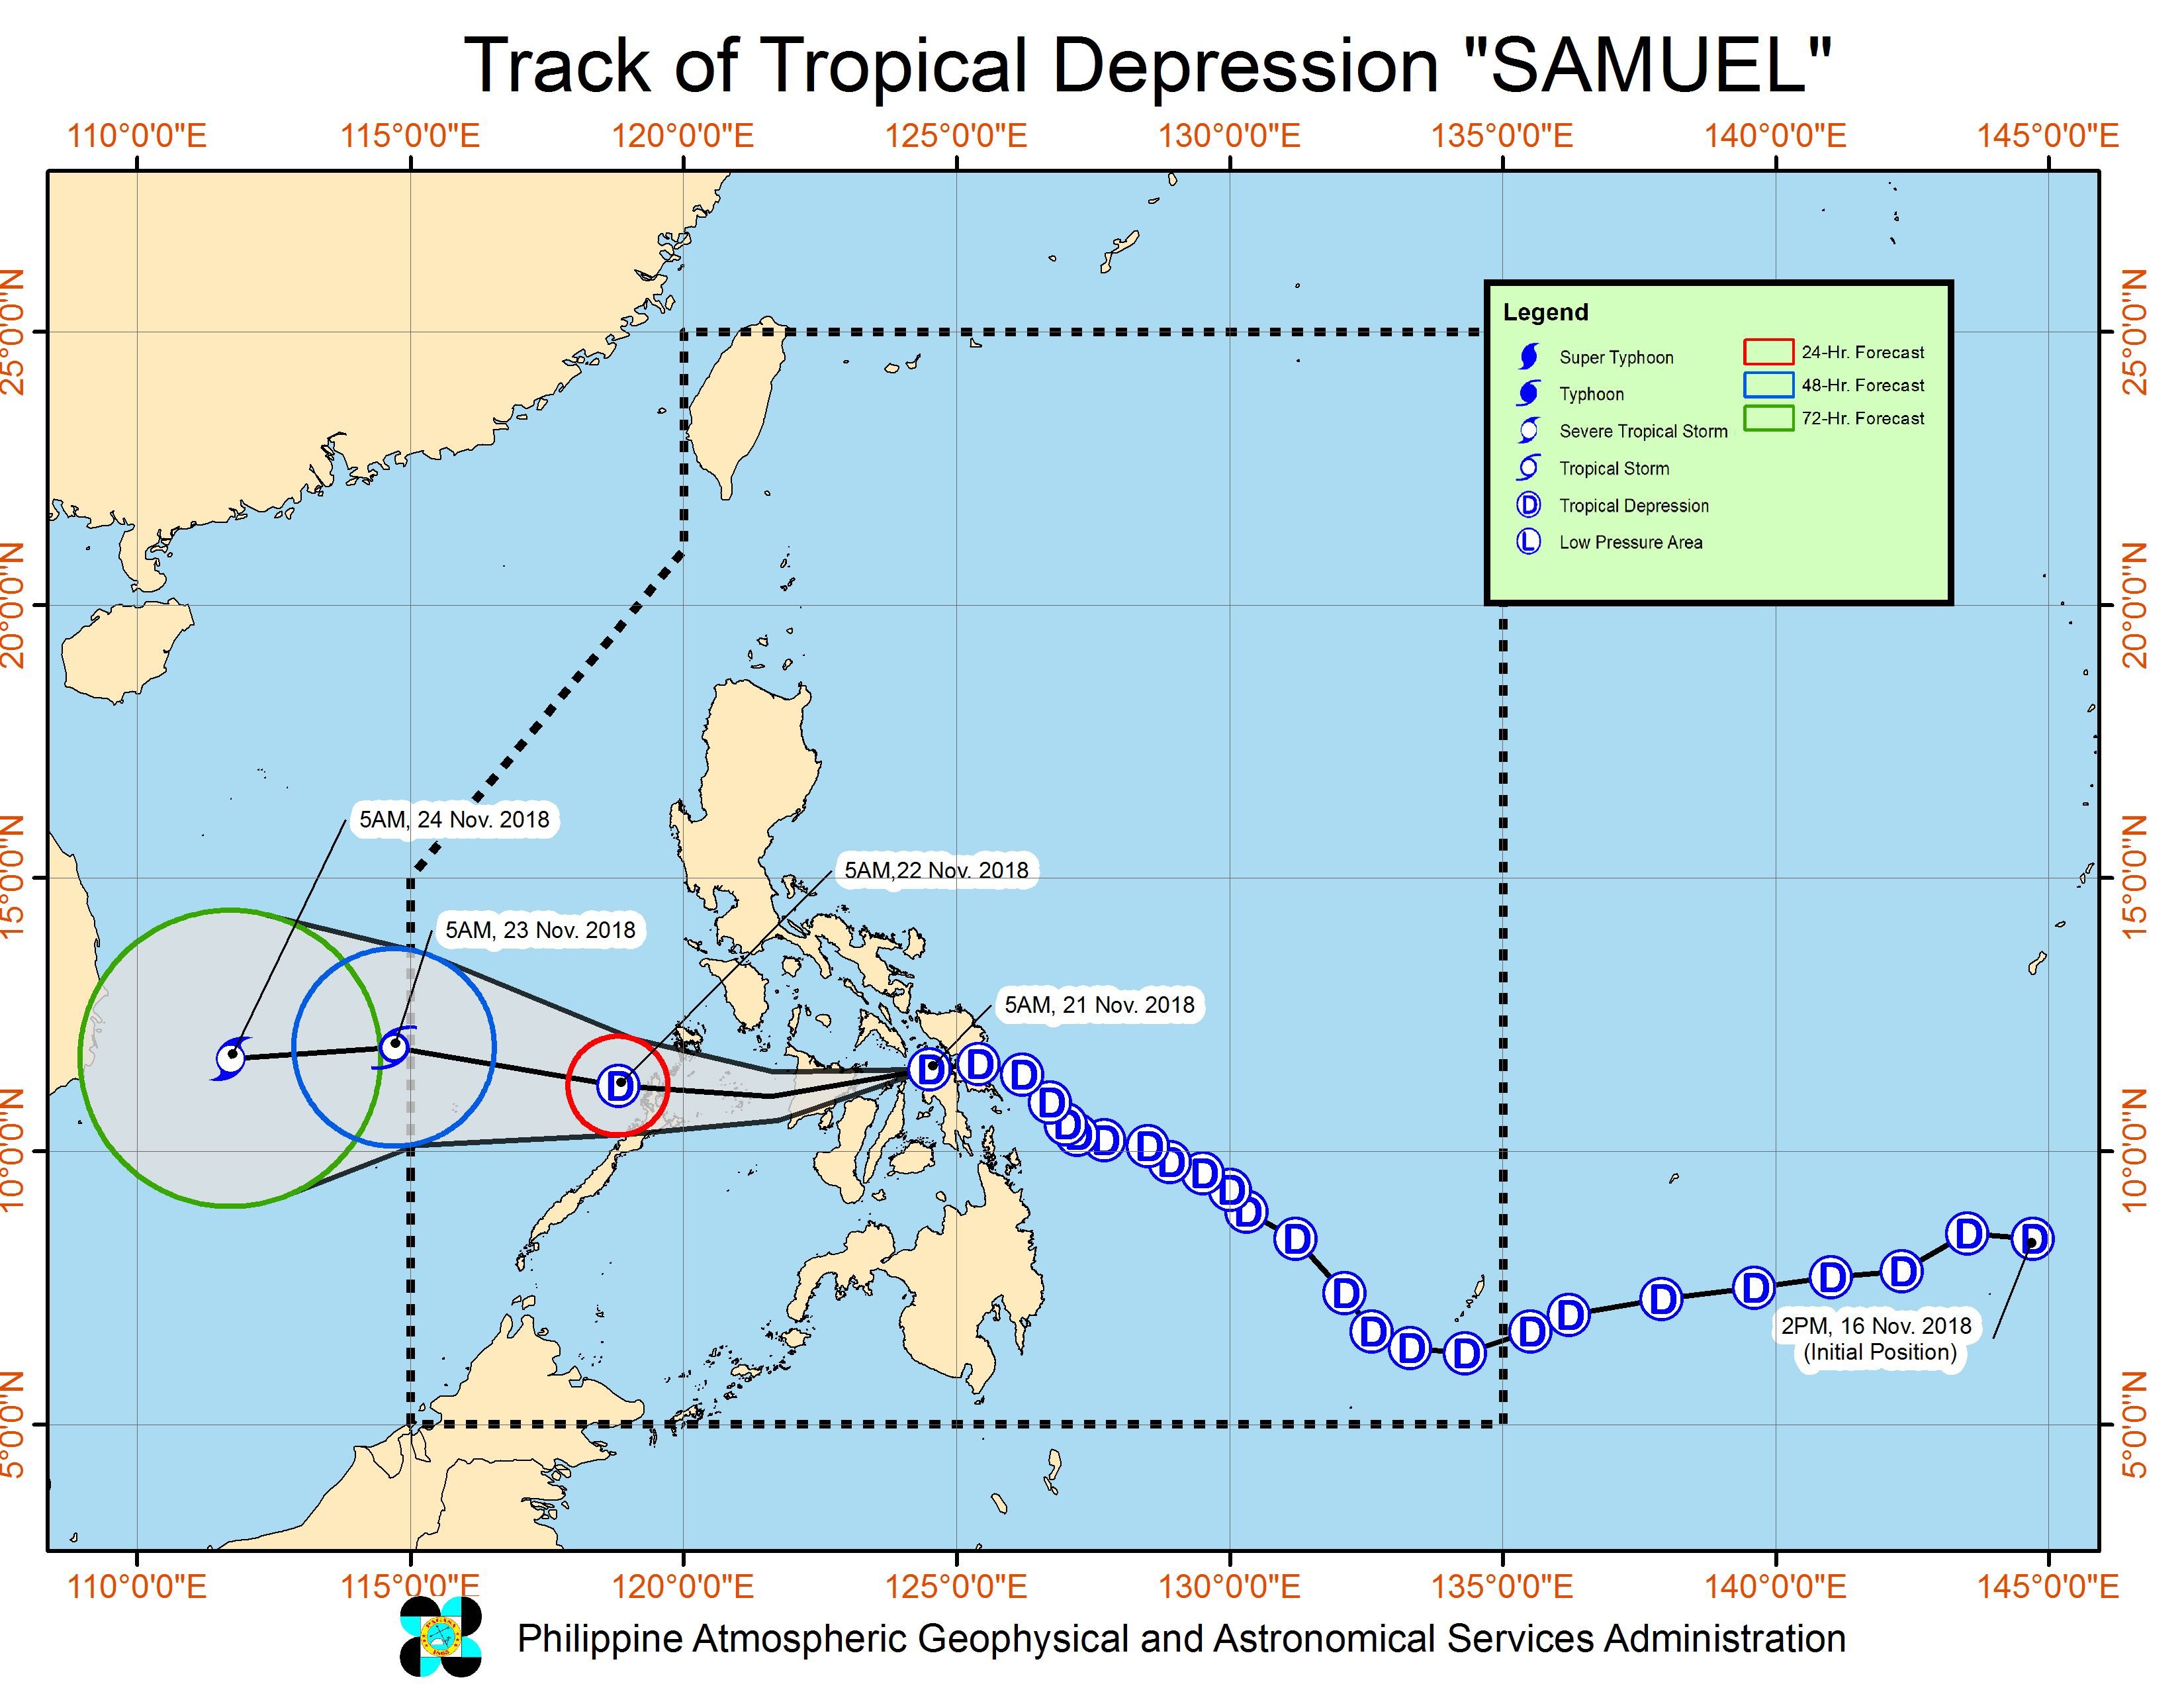 Forecast track of Tropical Depression Samuel as of November 21, 2018, 8 am. Image from PAGASA 